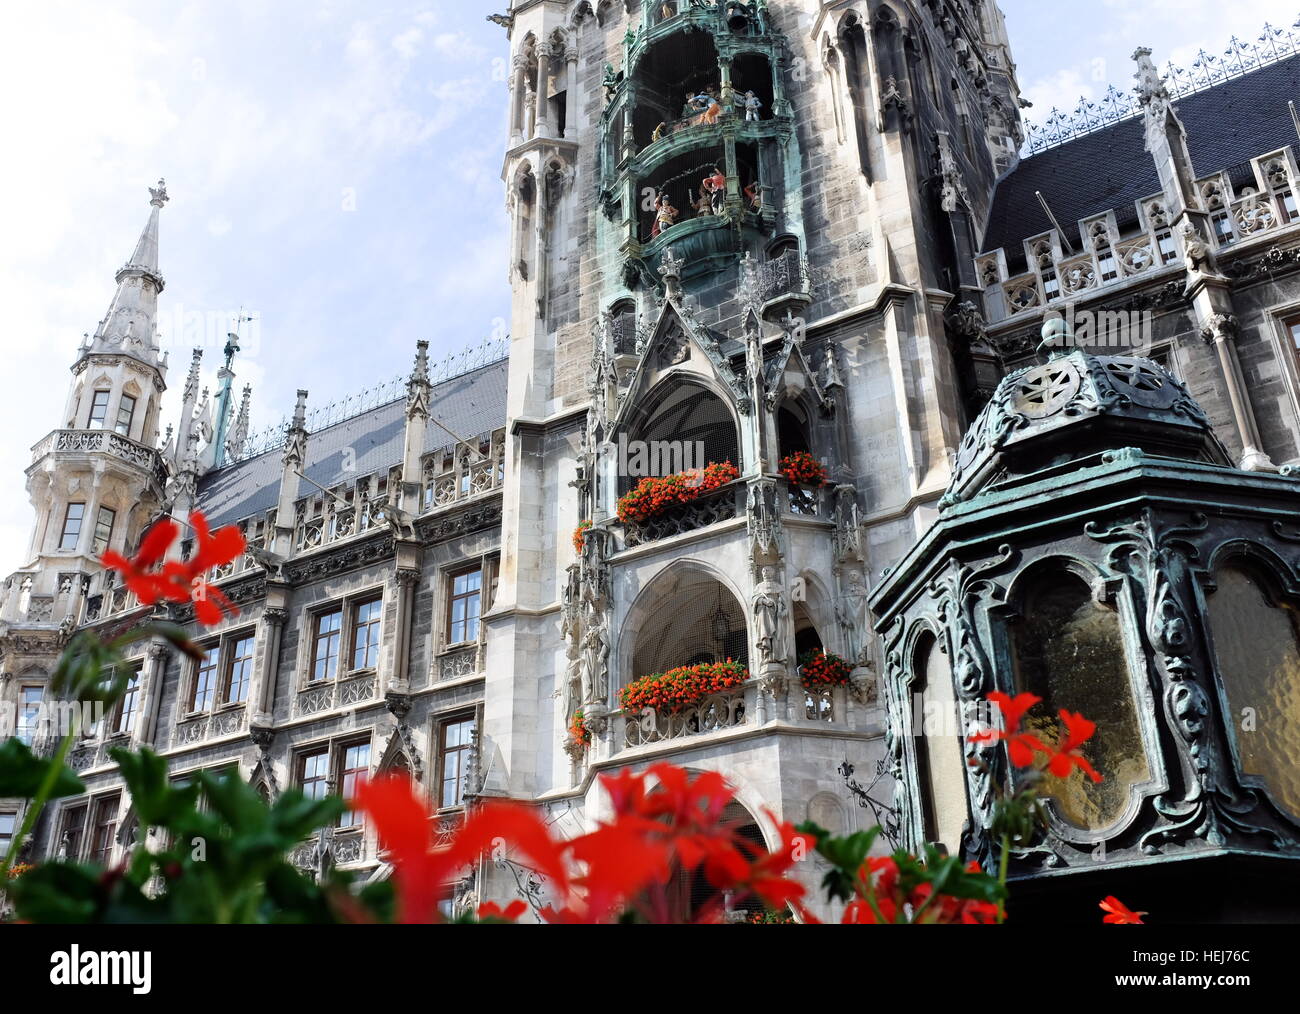 The New Town Hall in Munich, Germany, with its intricate limestone architecture and famous glockenspiel. Stock Photo